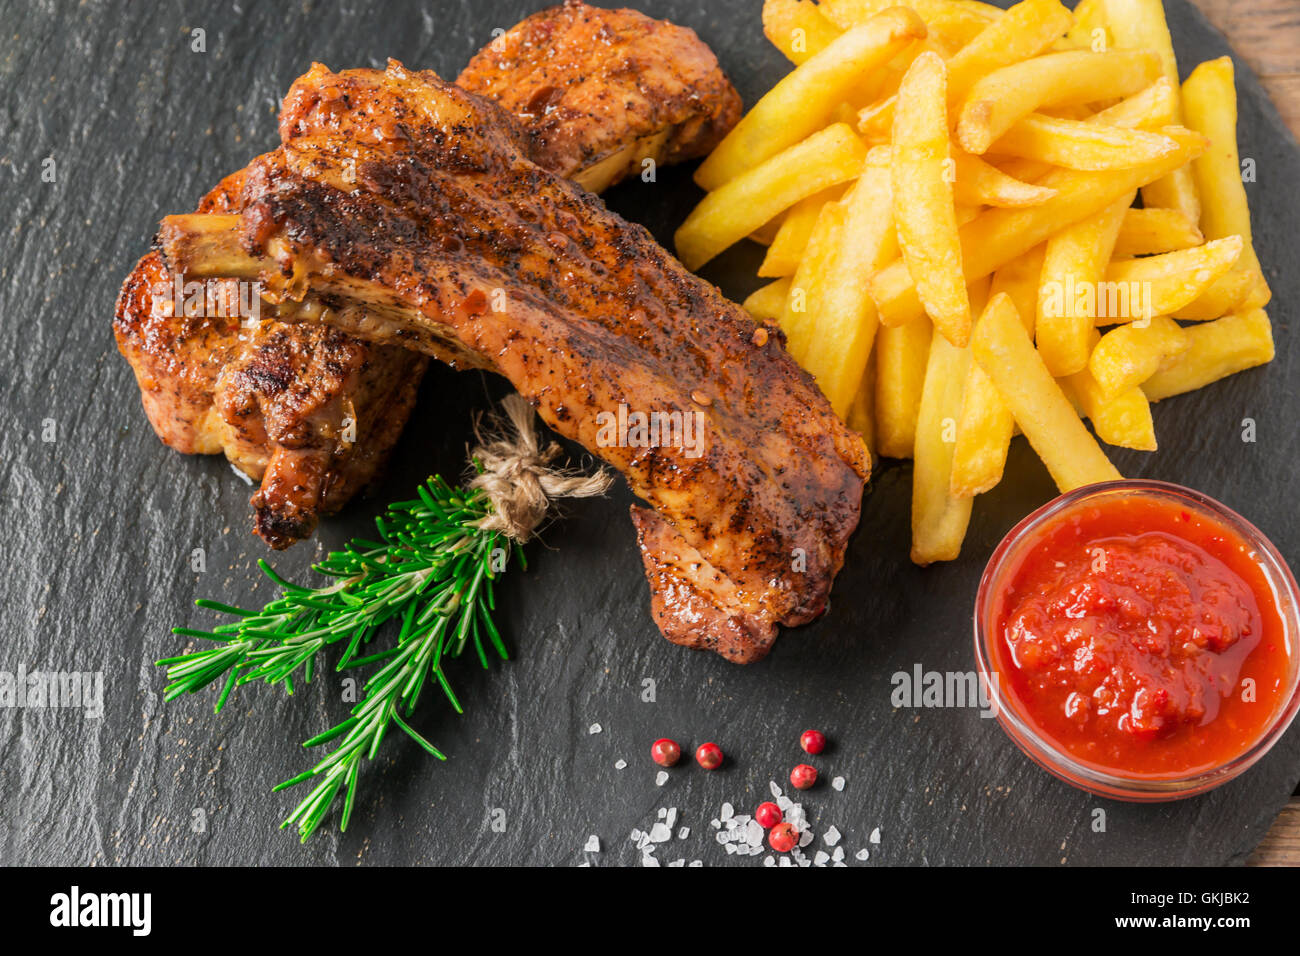 baked pork ribs with french fries and red sauce Stock Photo